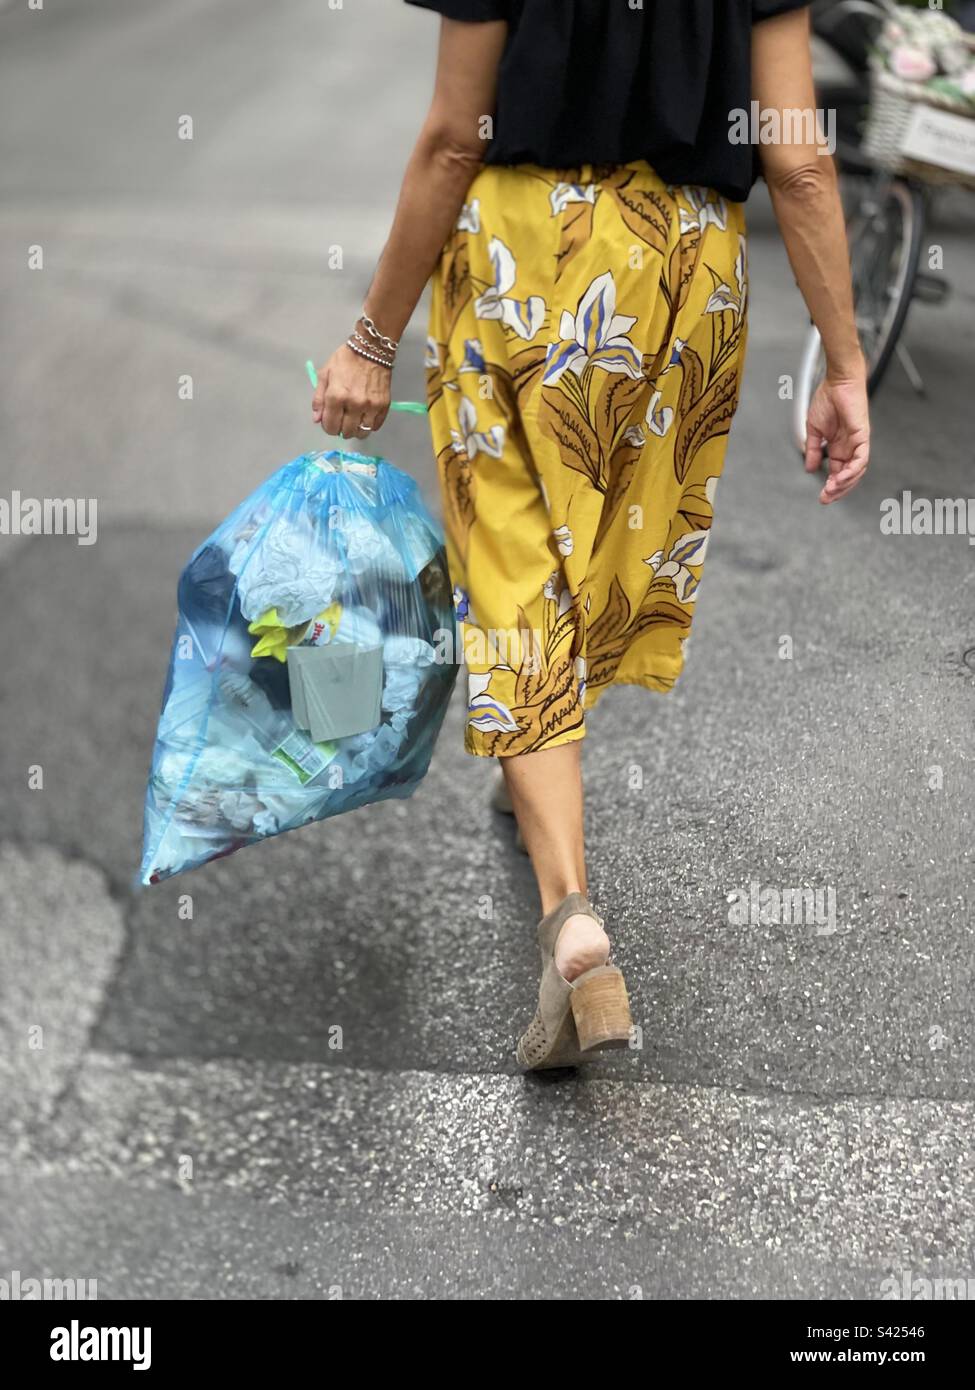 Woman from behind walking taking the trash out in plastic bag Stock Photo